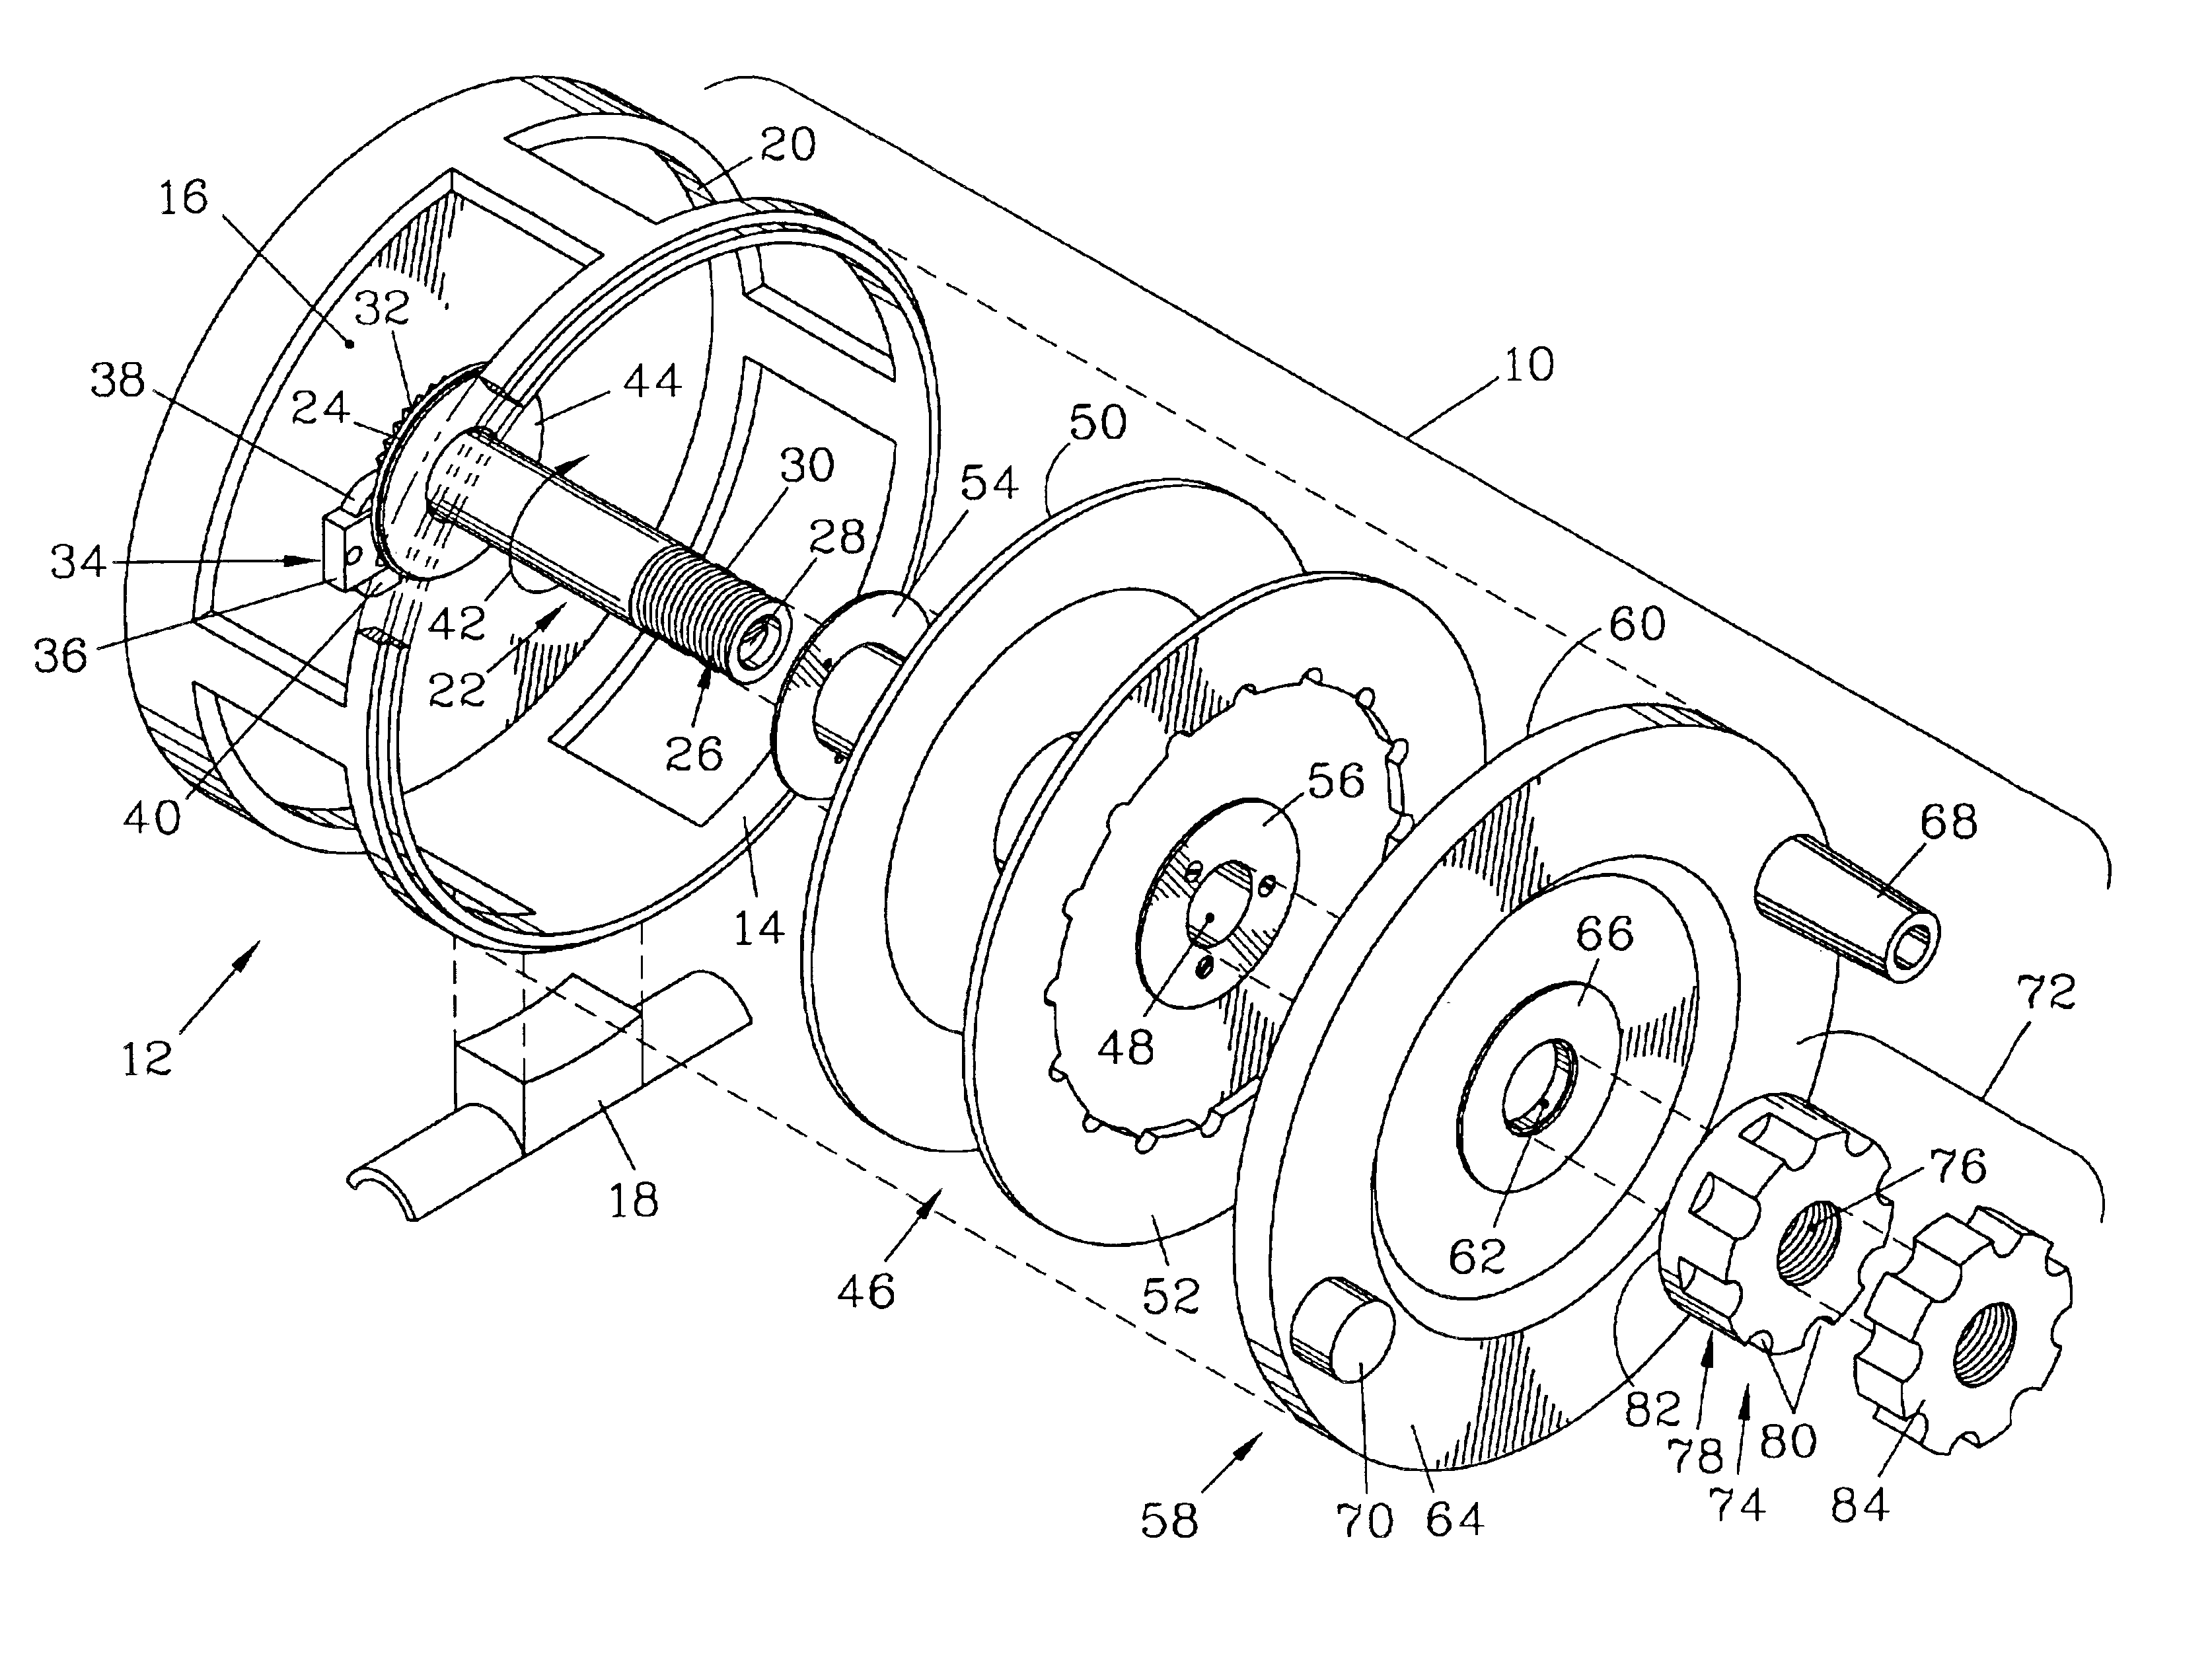 Variable use fly-fishing reel